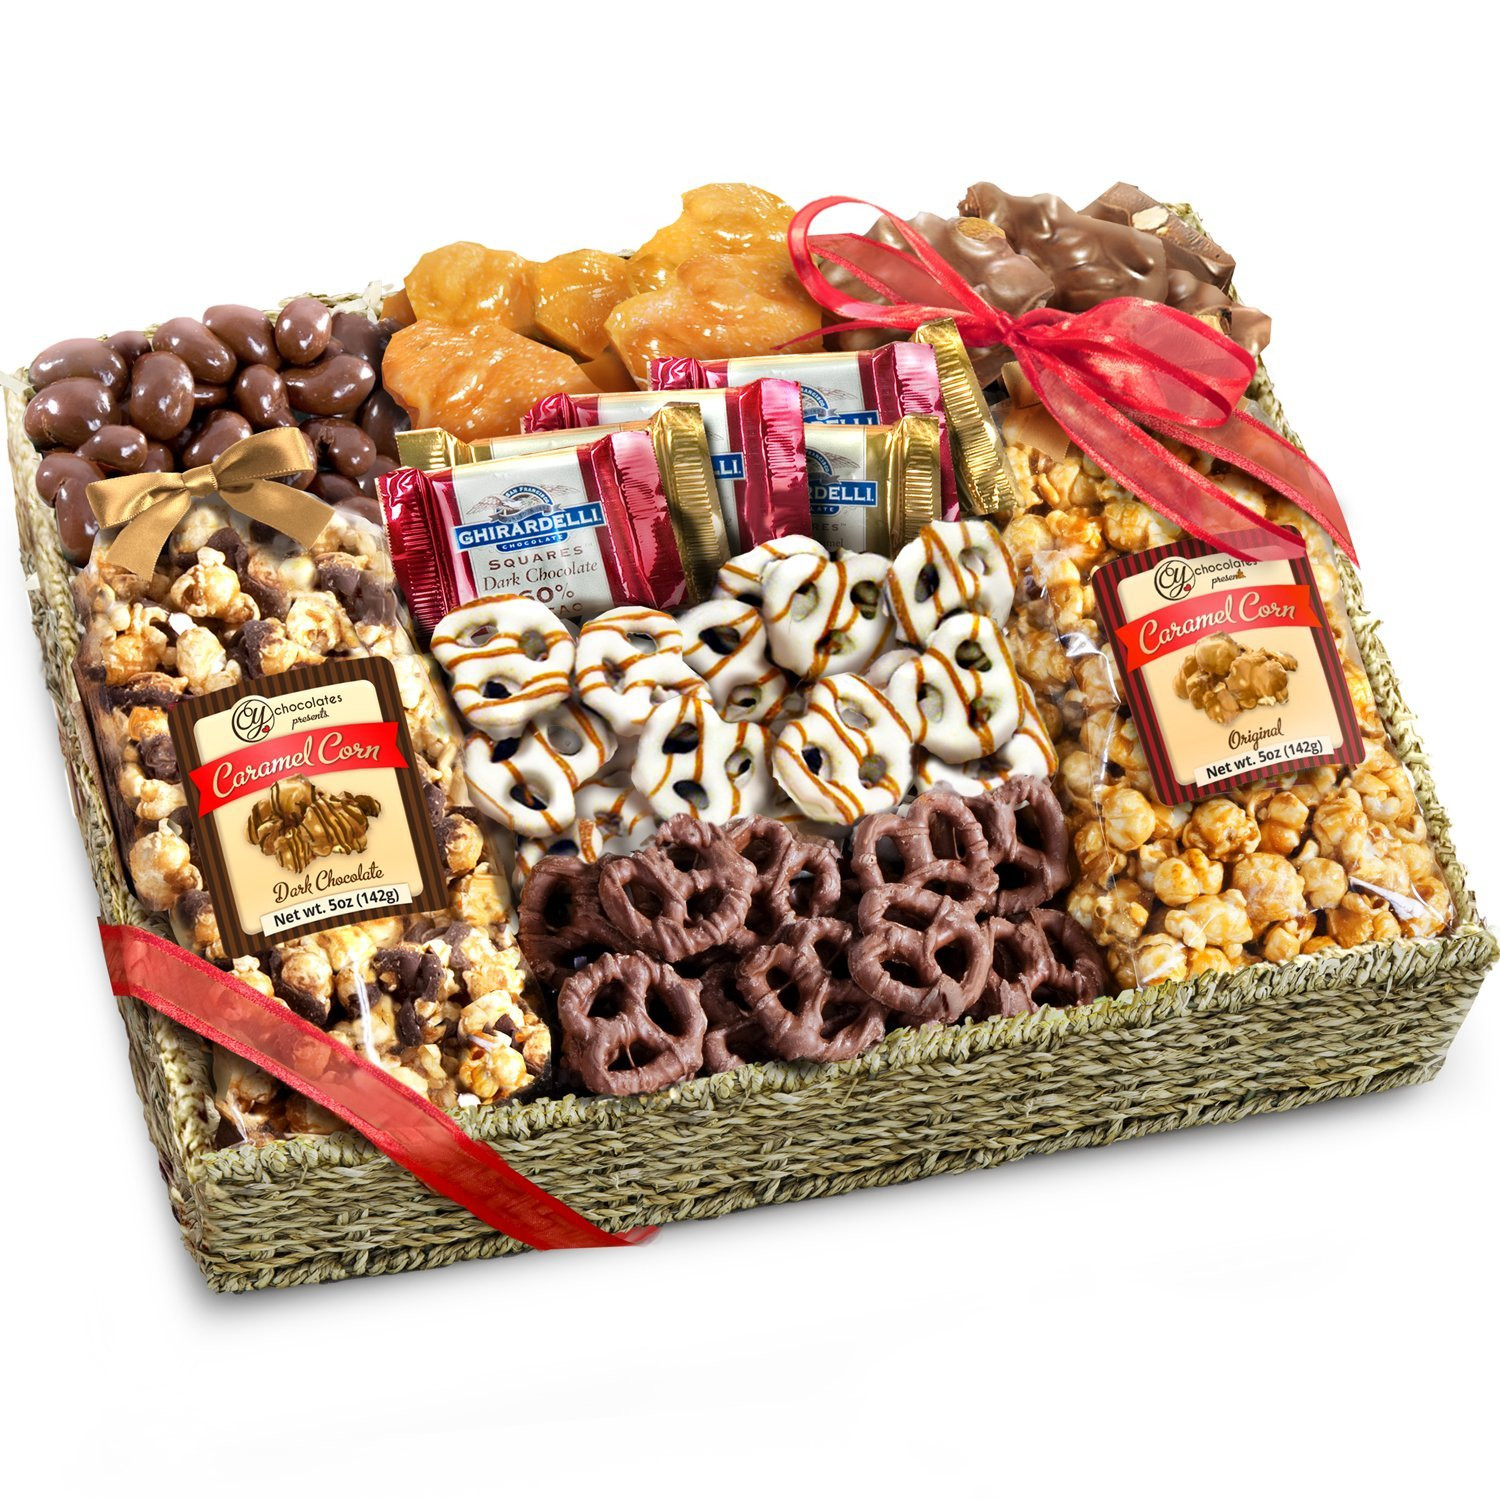 Snack Gift Basket Ideas
 Cookie Gift Boxes & Baskets Best Holiday Treats Snacks